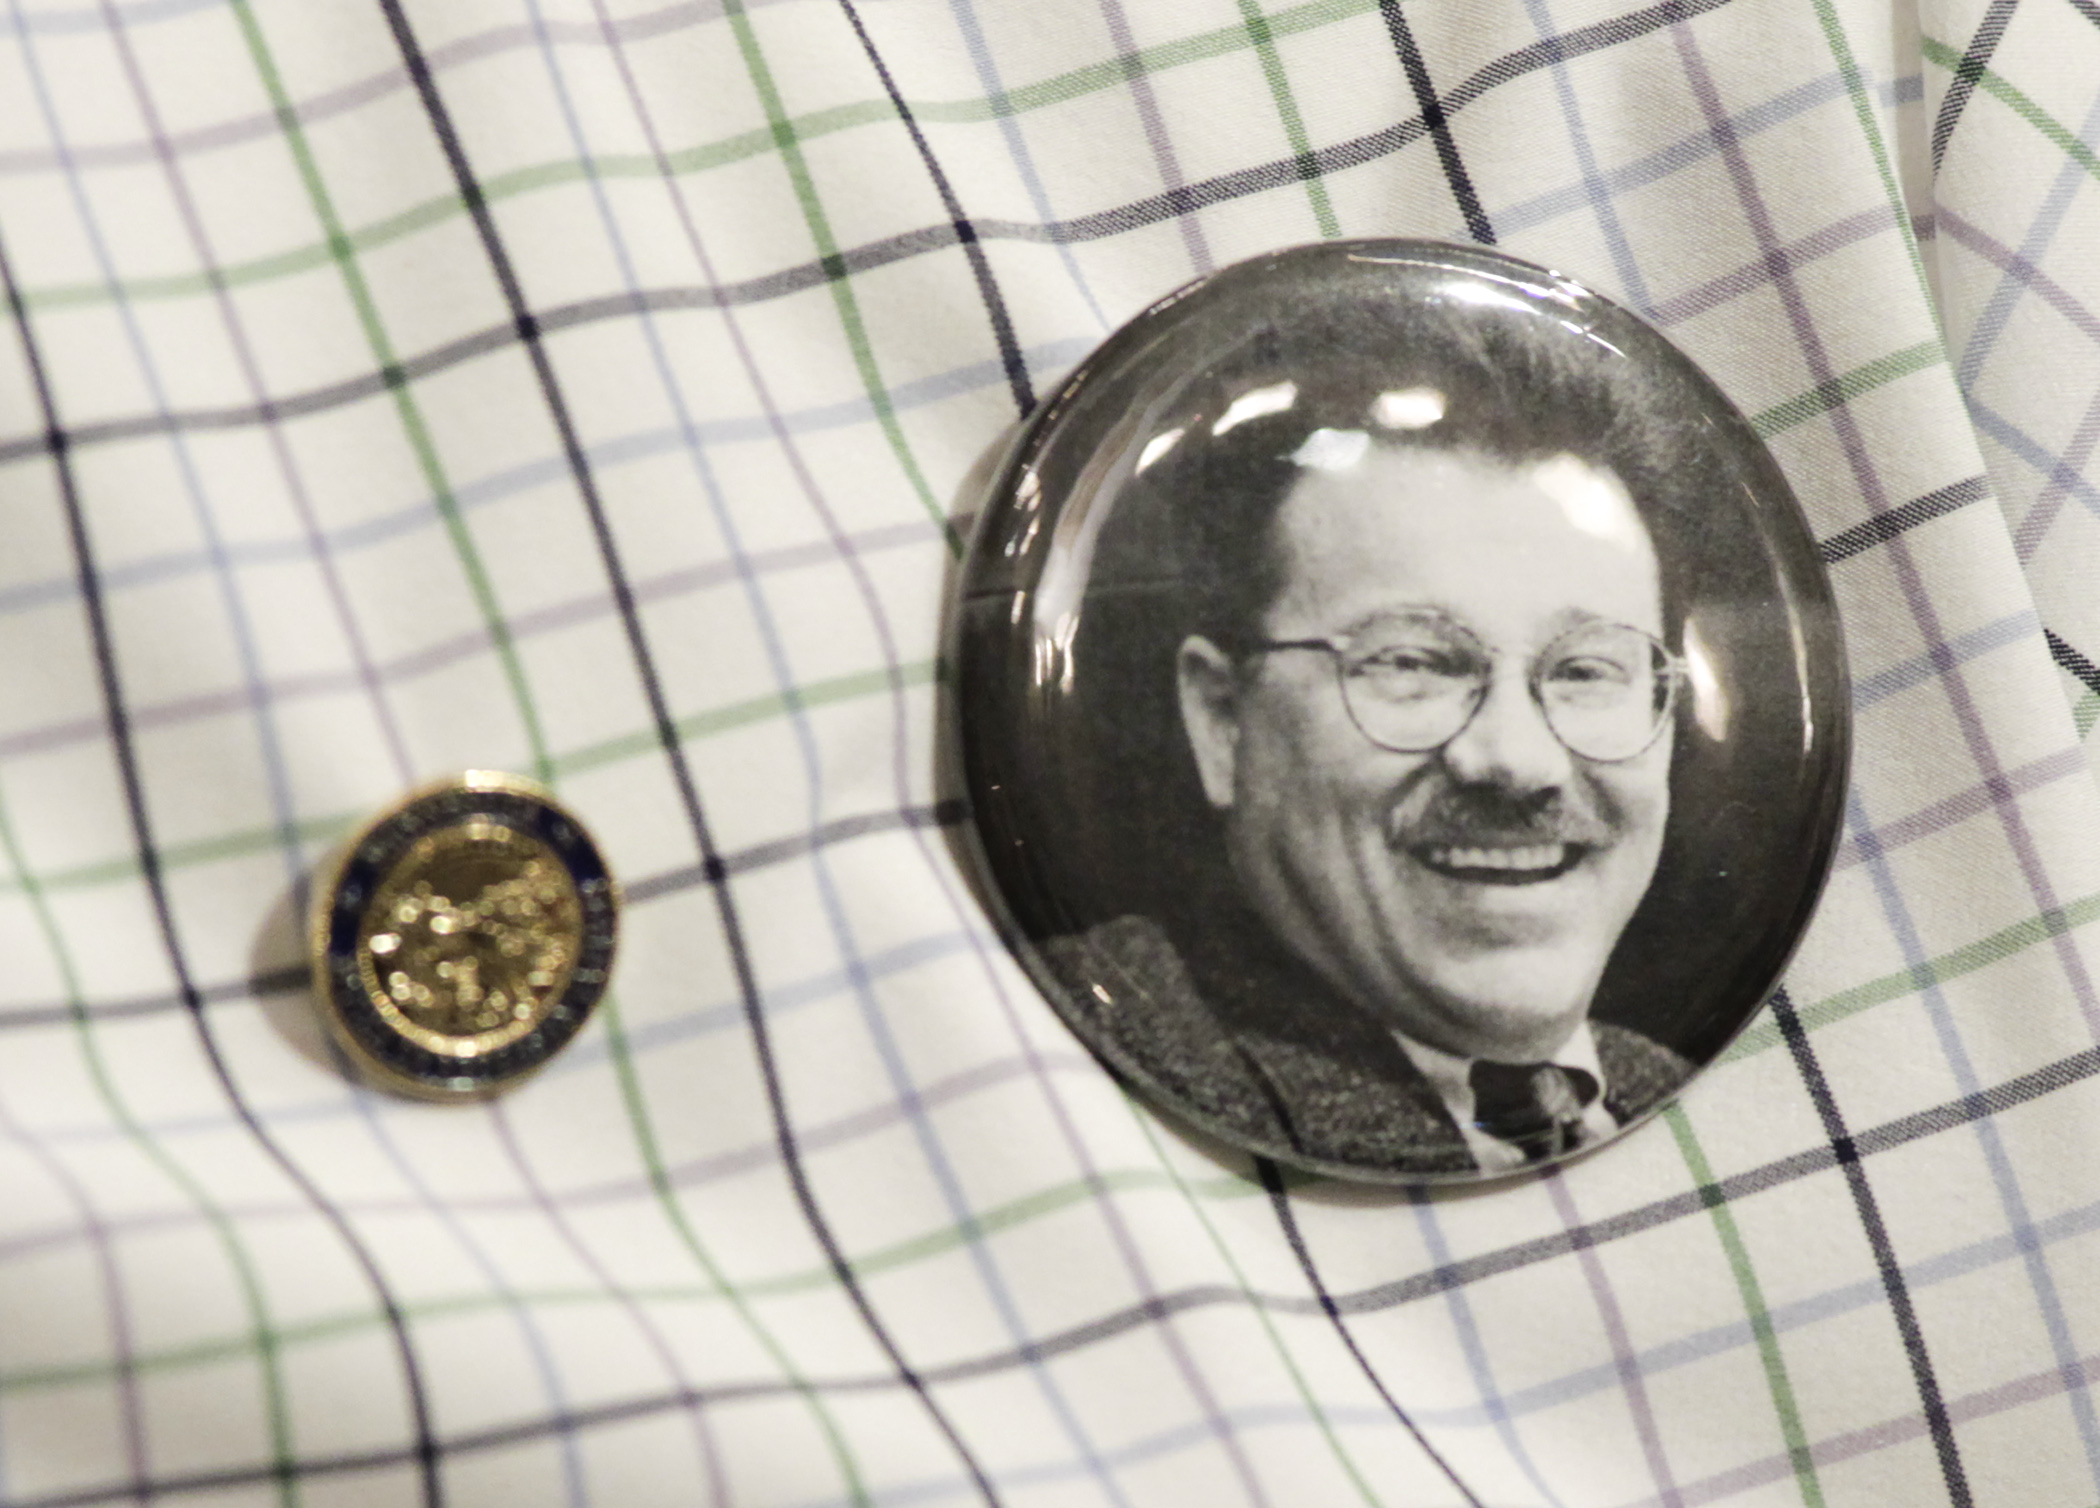 Rep. Brad Tabke wears a Tom Rukavina button as members spoke on the House Floor Jan. 10 about the former member from Virginia who died earlier this week. Photo by Paul Battaglia